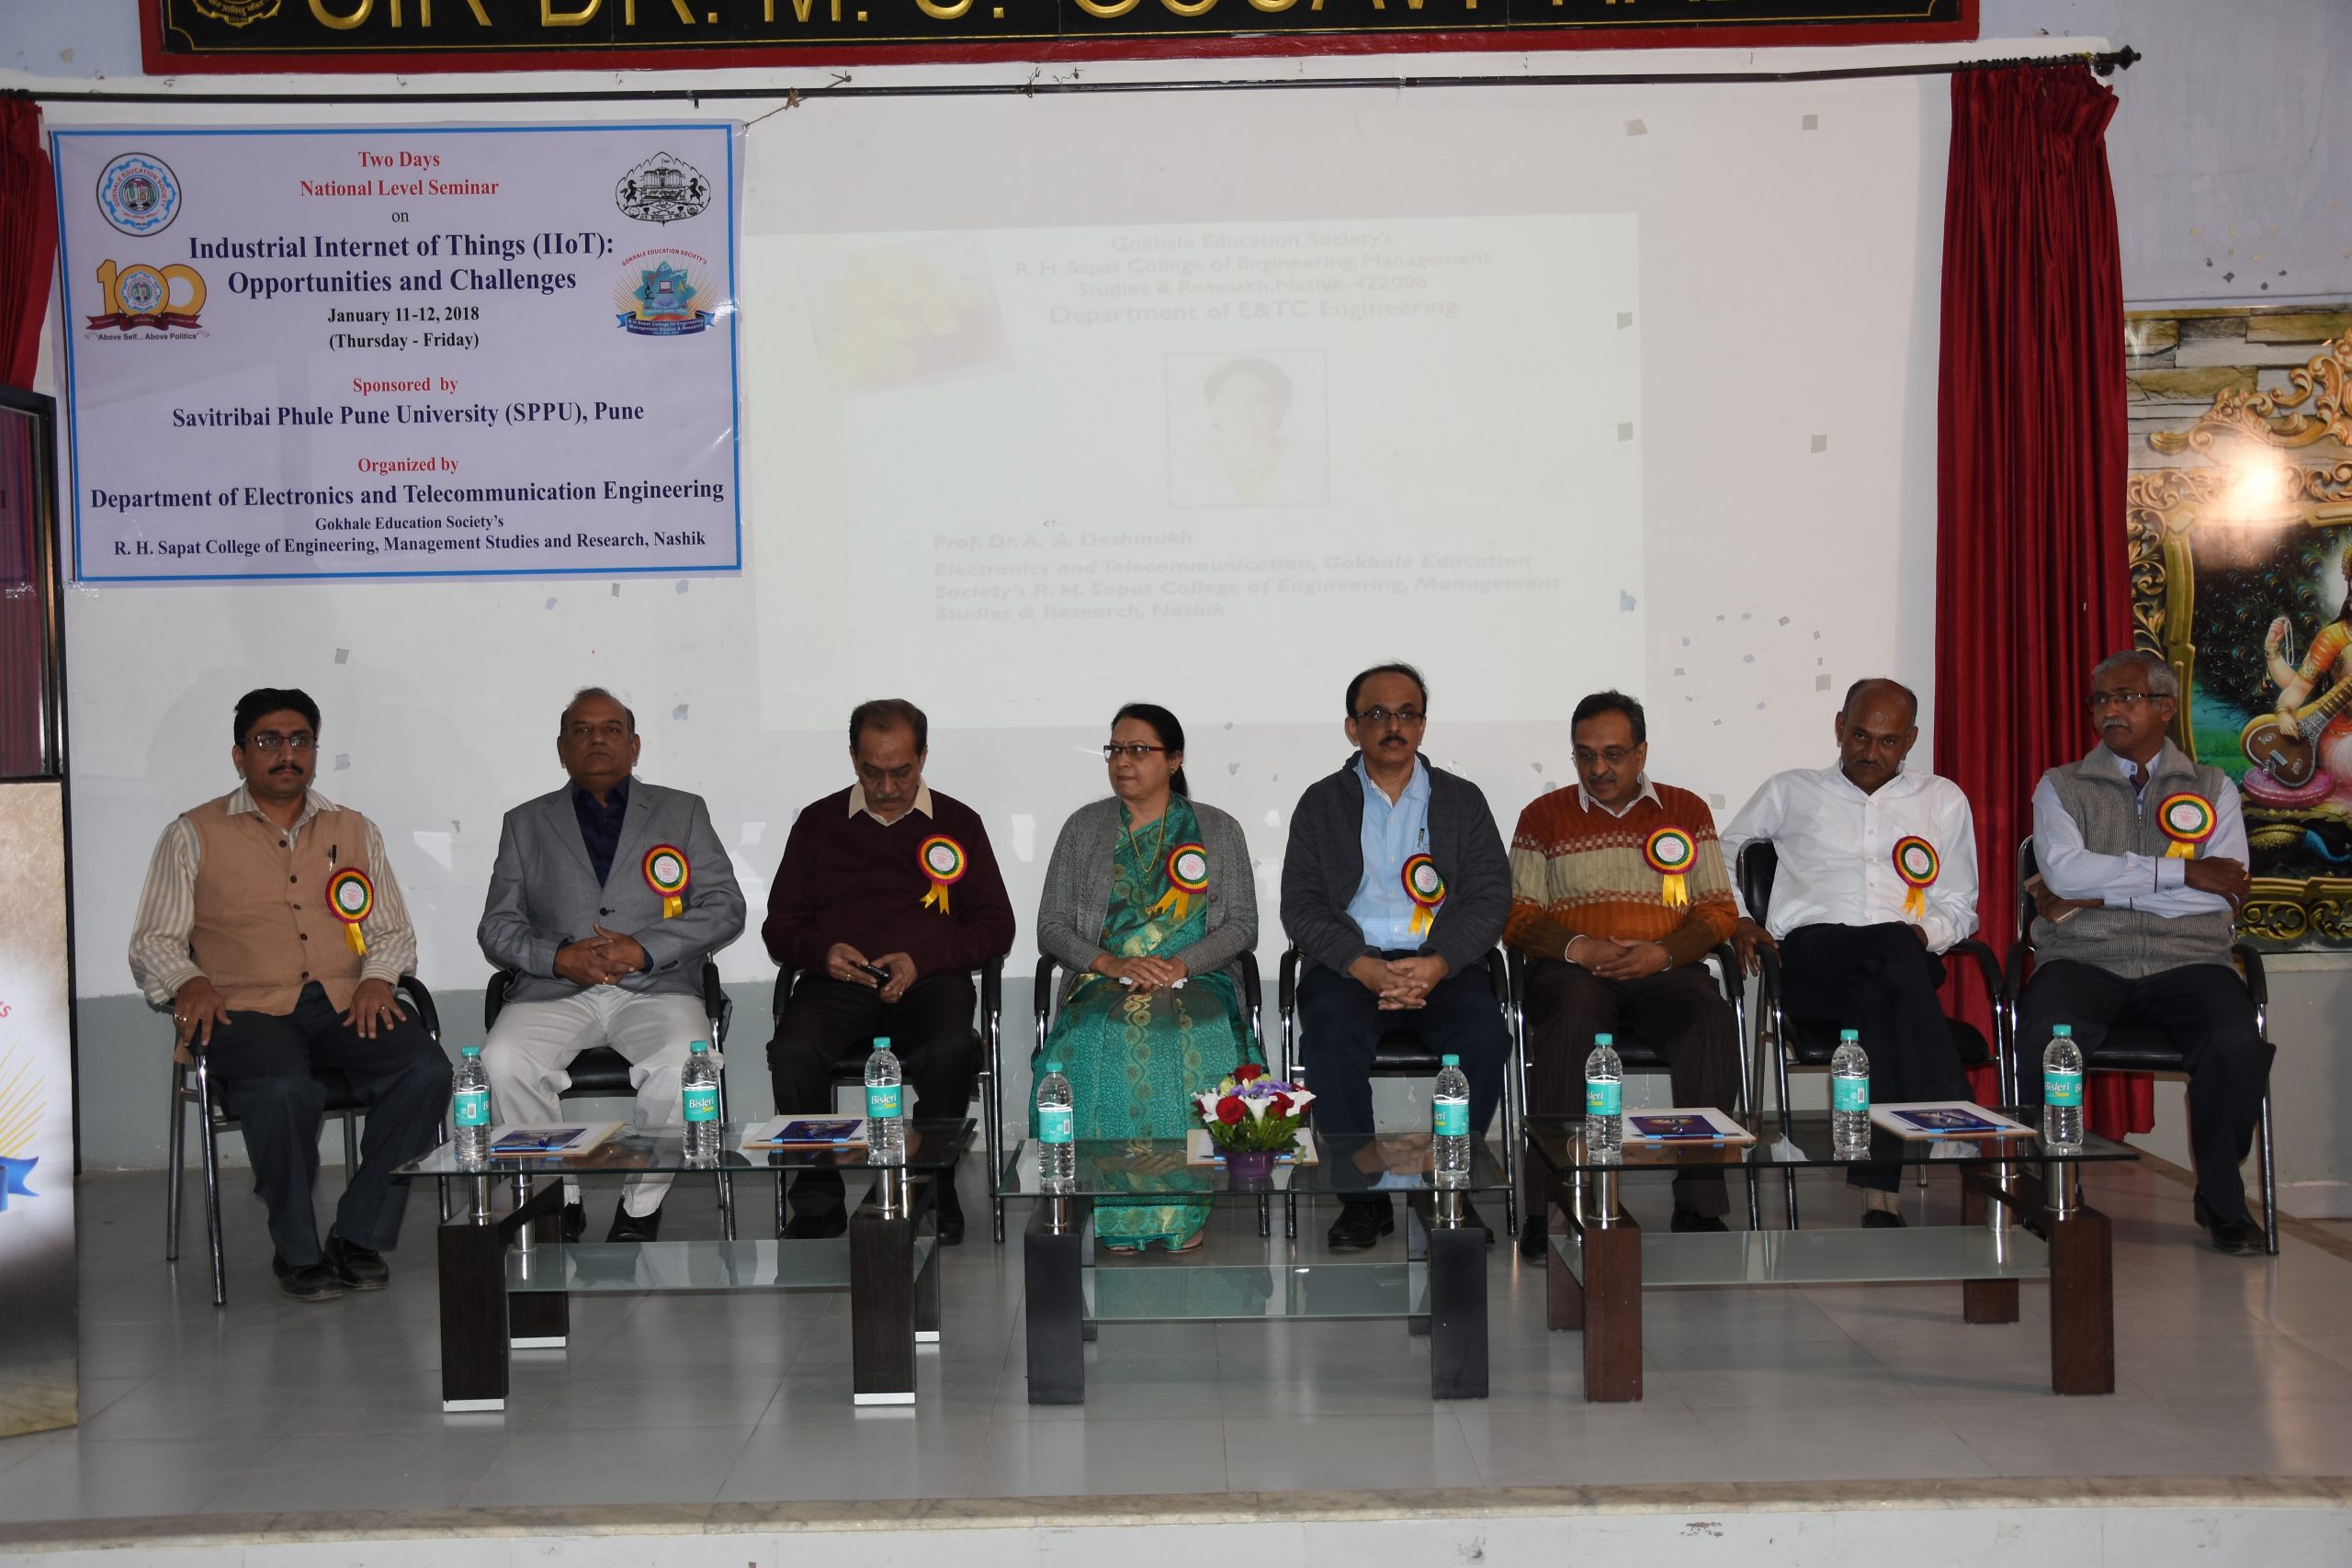 National level seminar on Indusrtial IoT Opportunities and Challenges